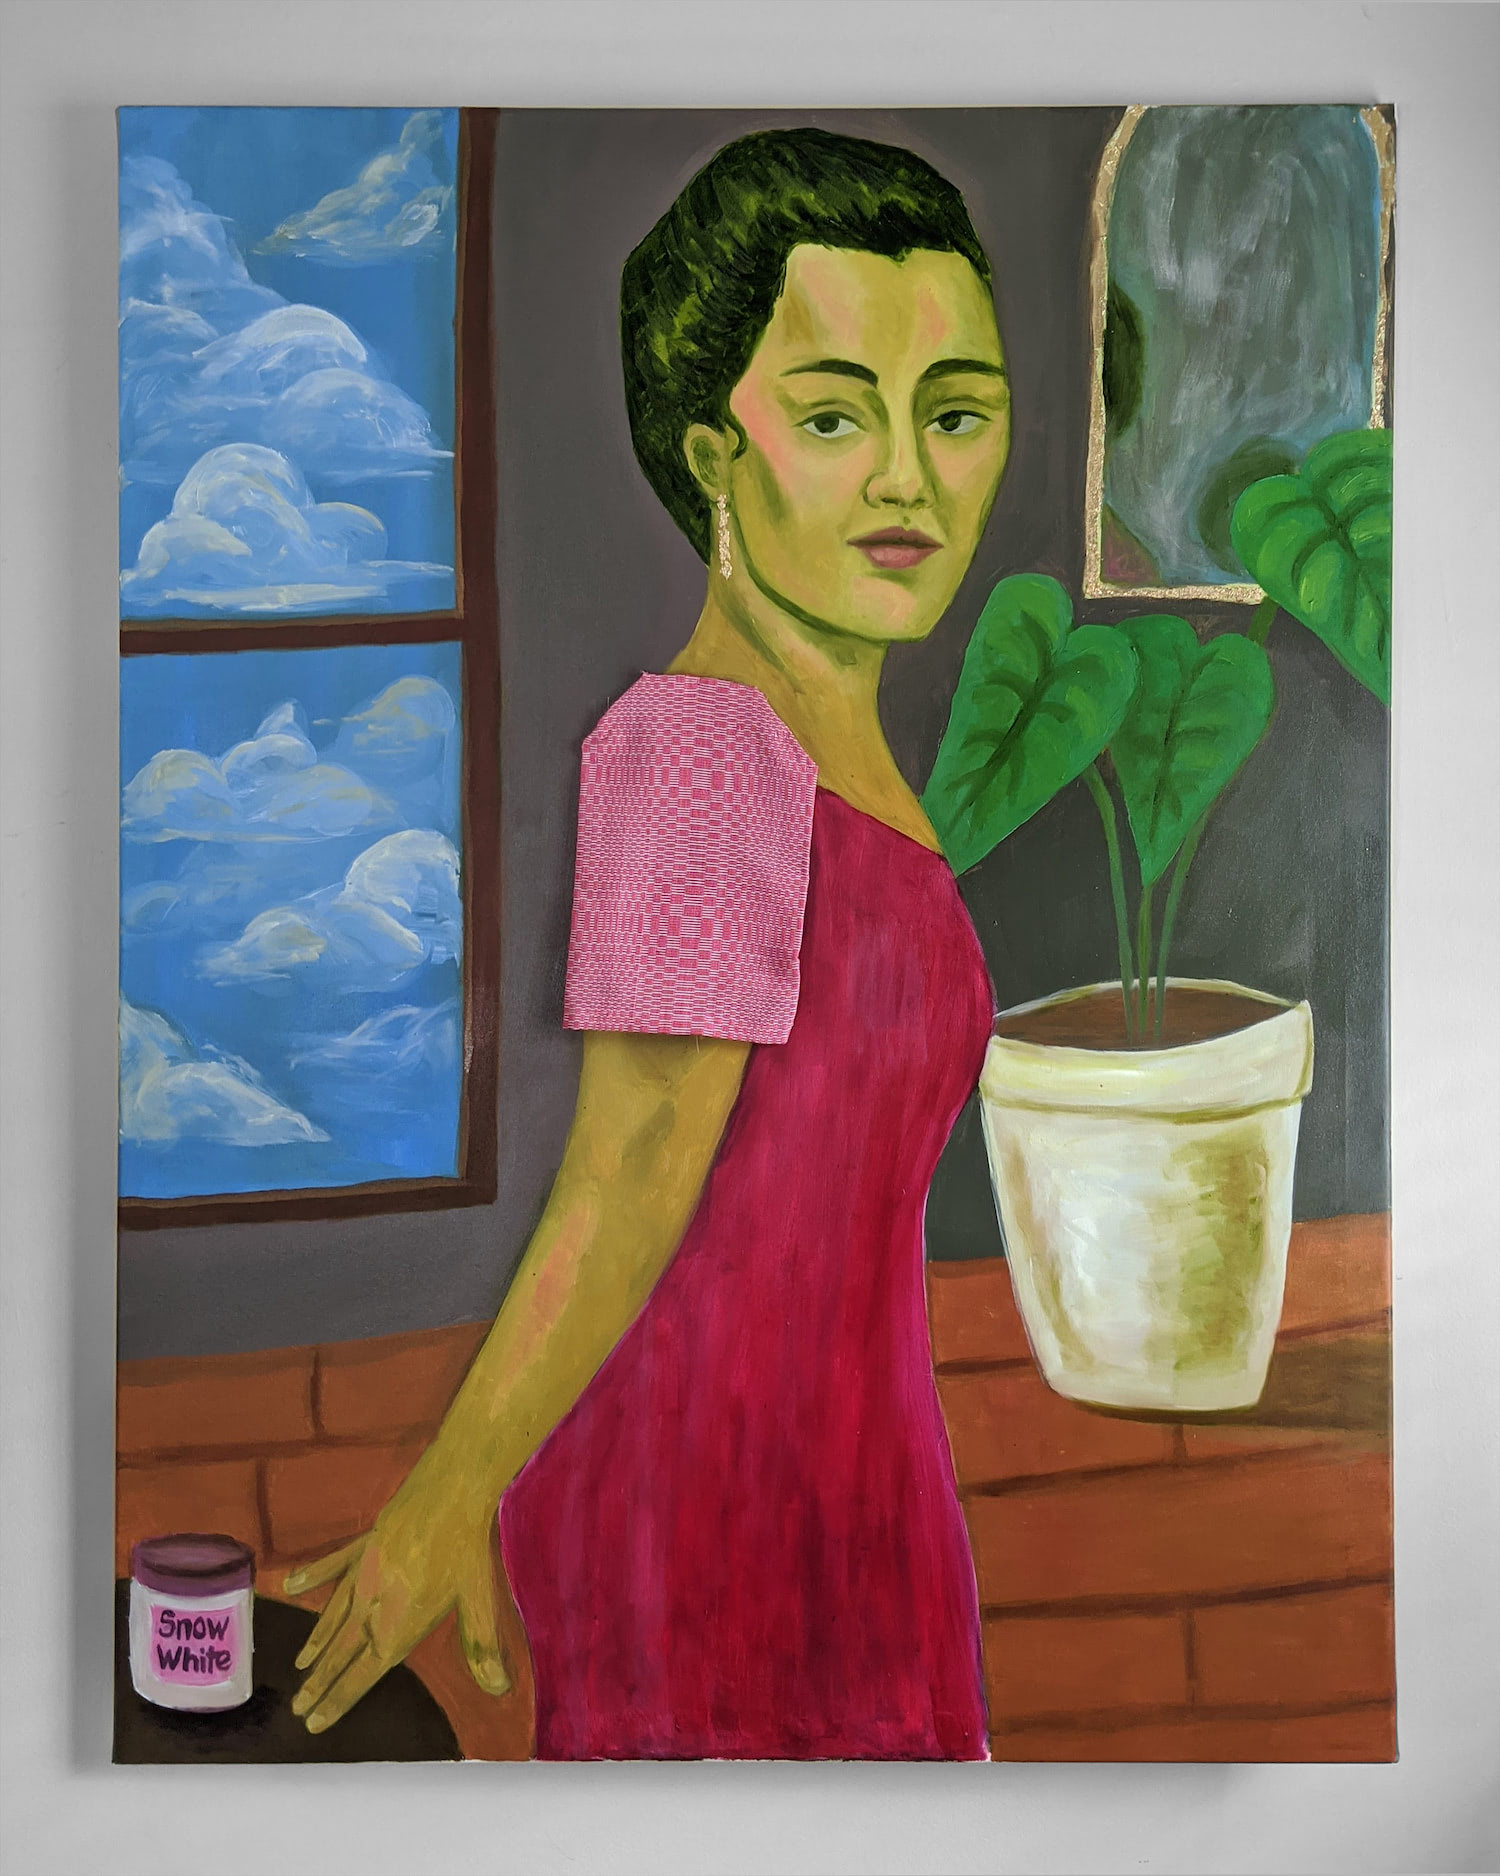 A painting with a woman standing in the middle. Her skin is painted yellow and she is wearing a pink dress. There is cloth attached to the canvas to mimic a sleeve on her dress. There is a window with a bright blue sky and clouds behind her as well as plants. Her hand is resting on a table next to her with a container that says 